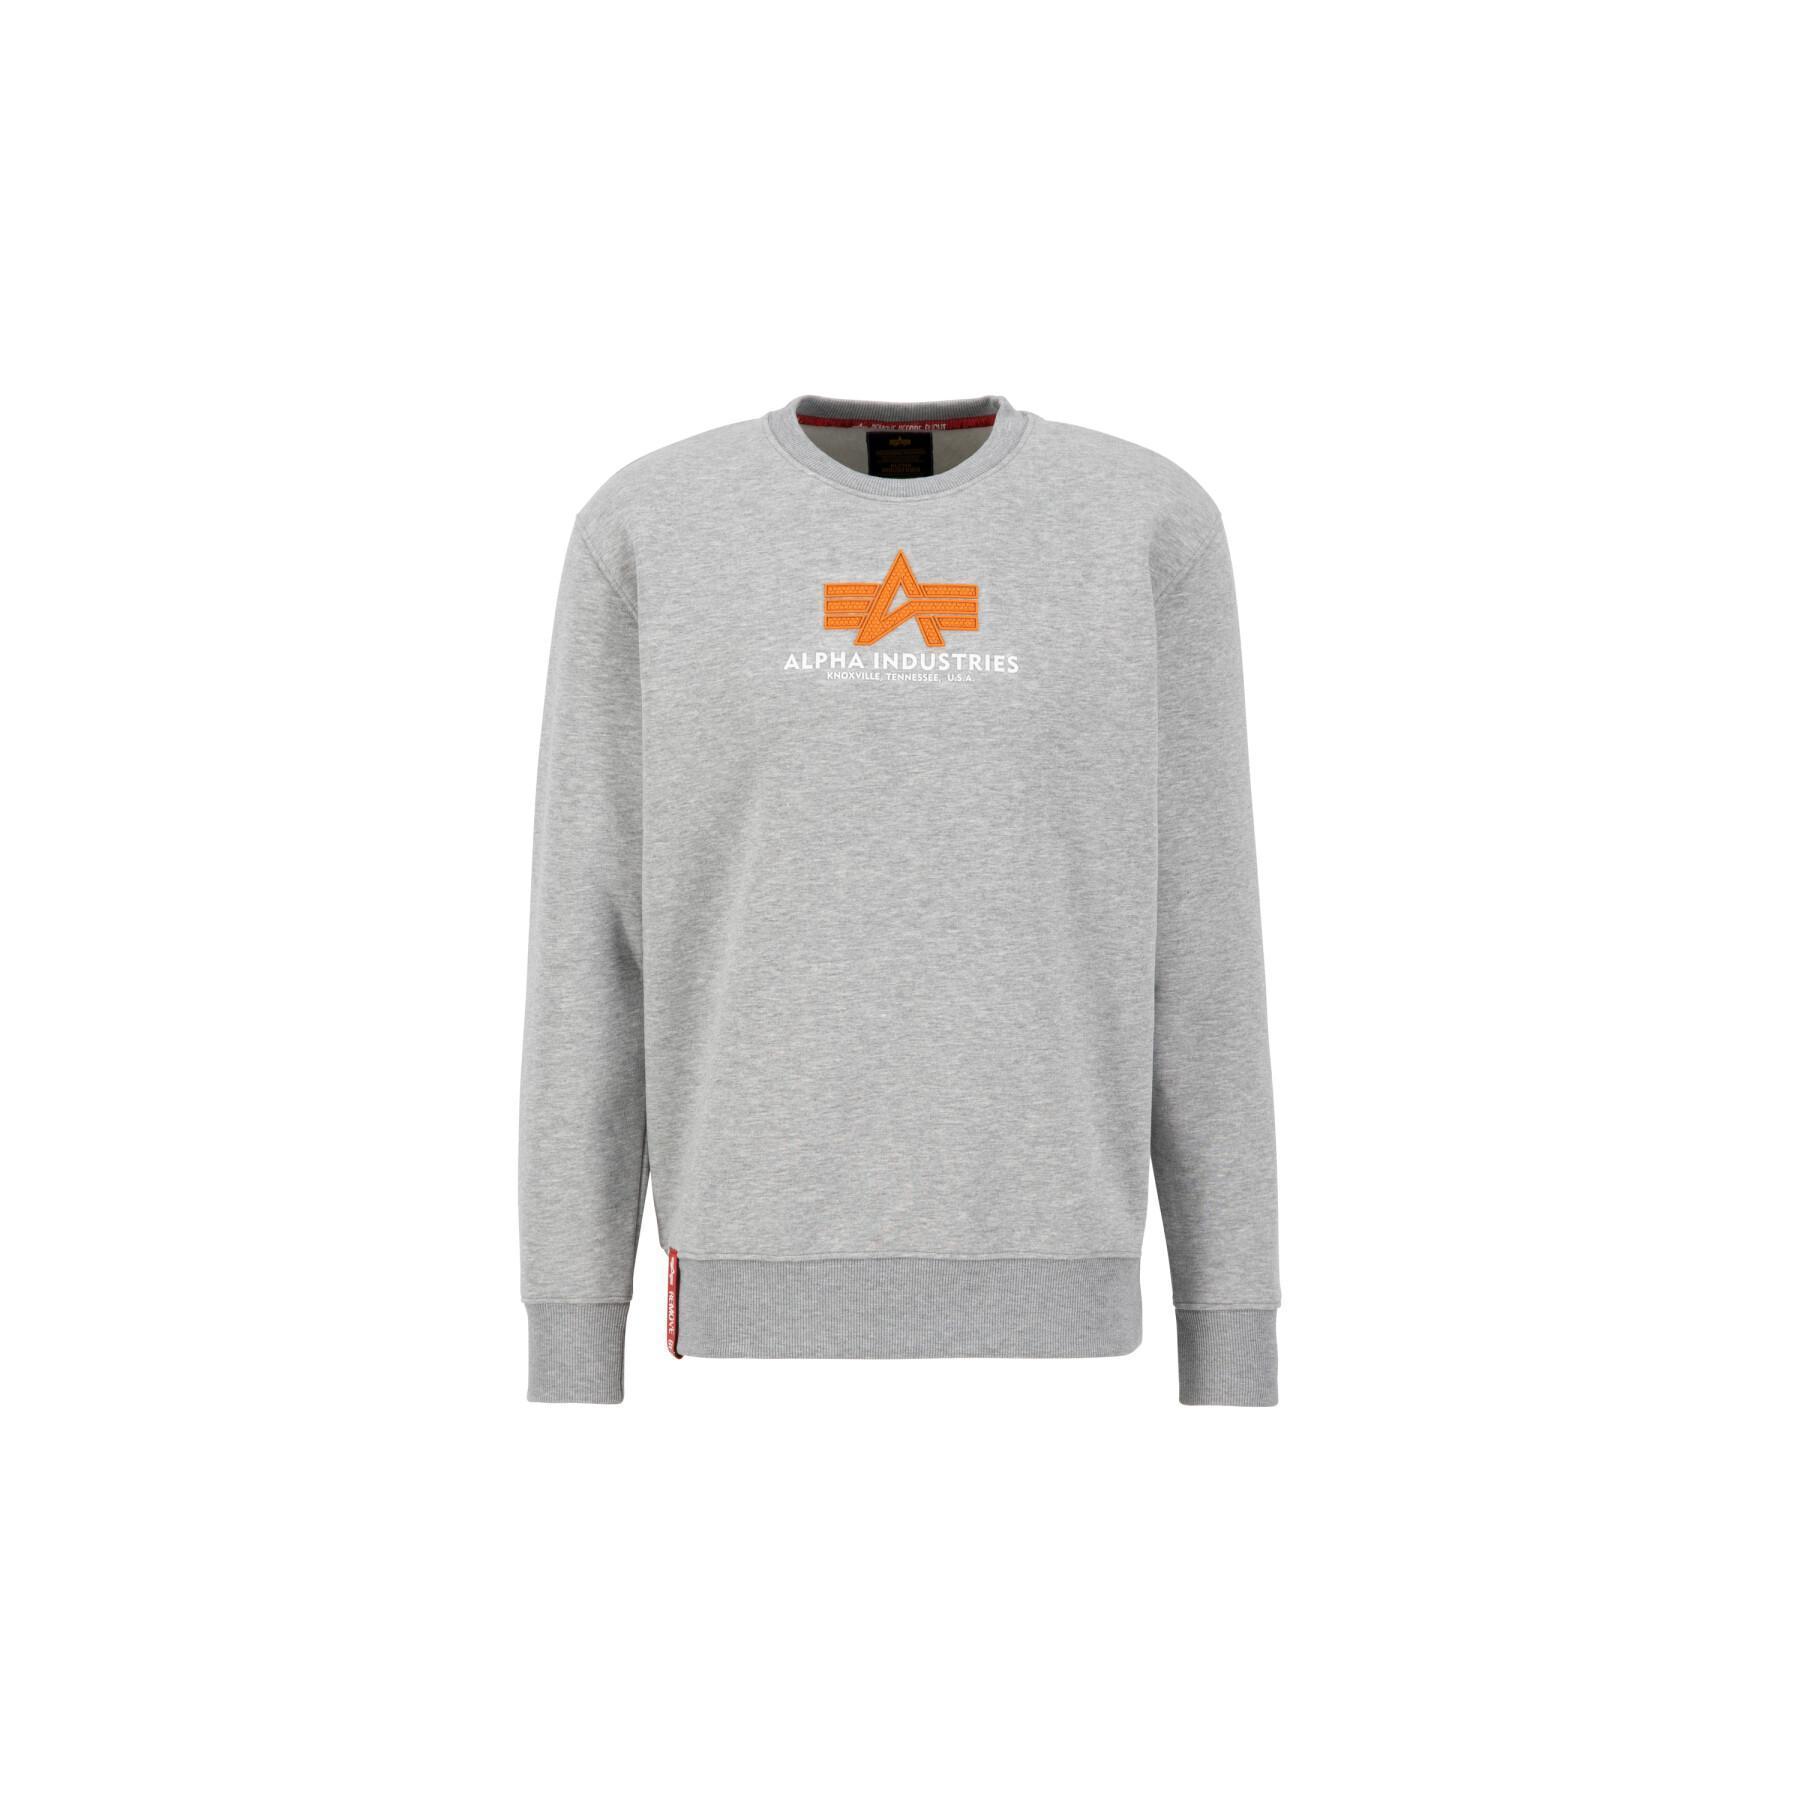 Sweater Alpha Industries Basic Rubber